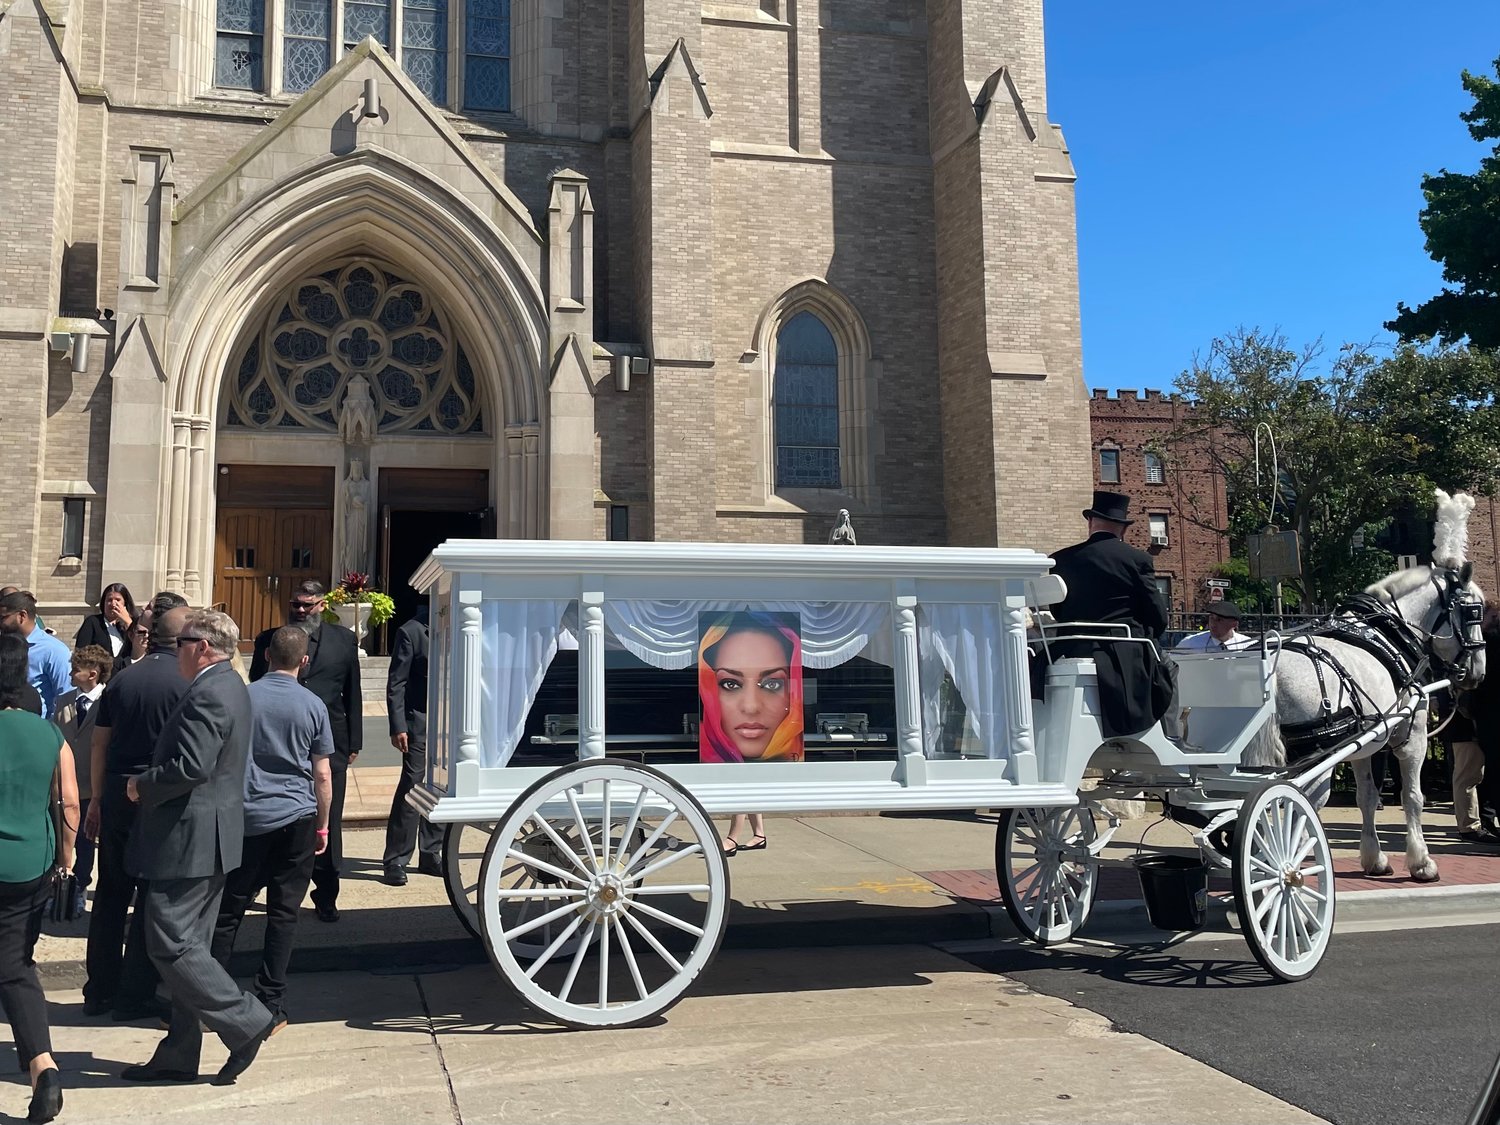 The body of Marivel Estevez was brought to St. Agnes Cathedral on a white horse-drawn hearse.